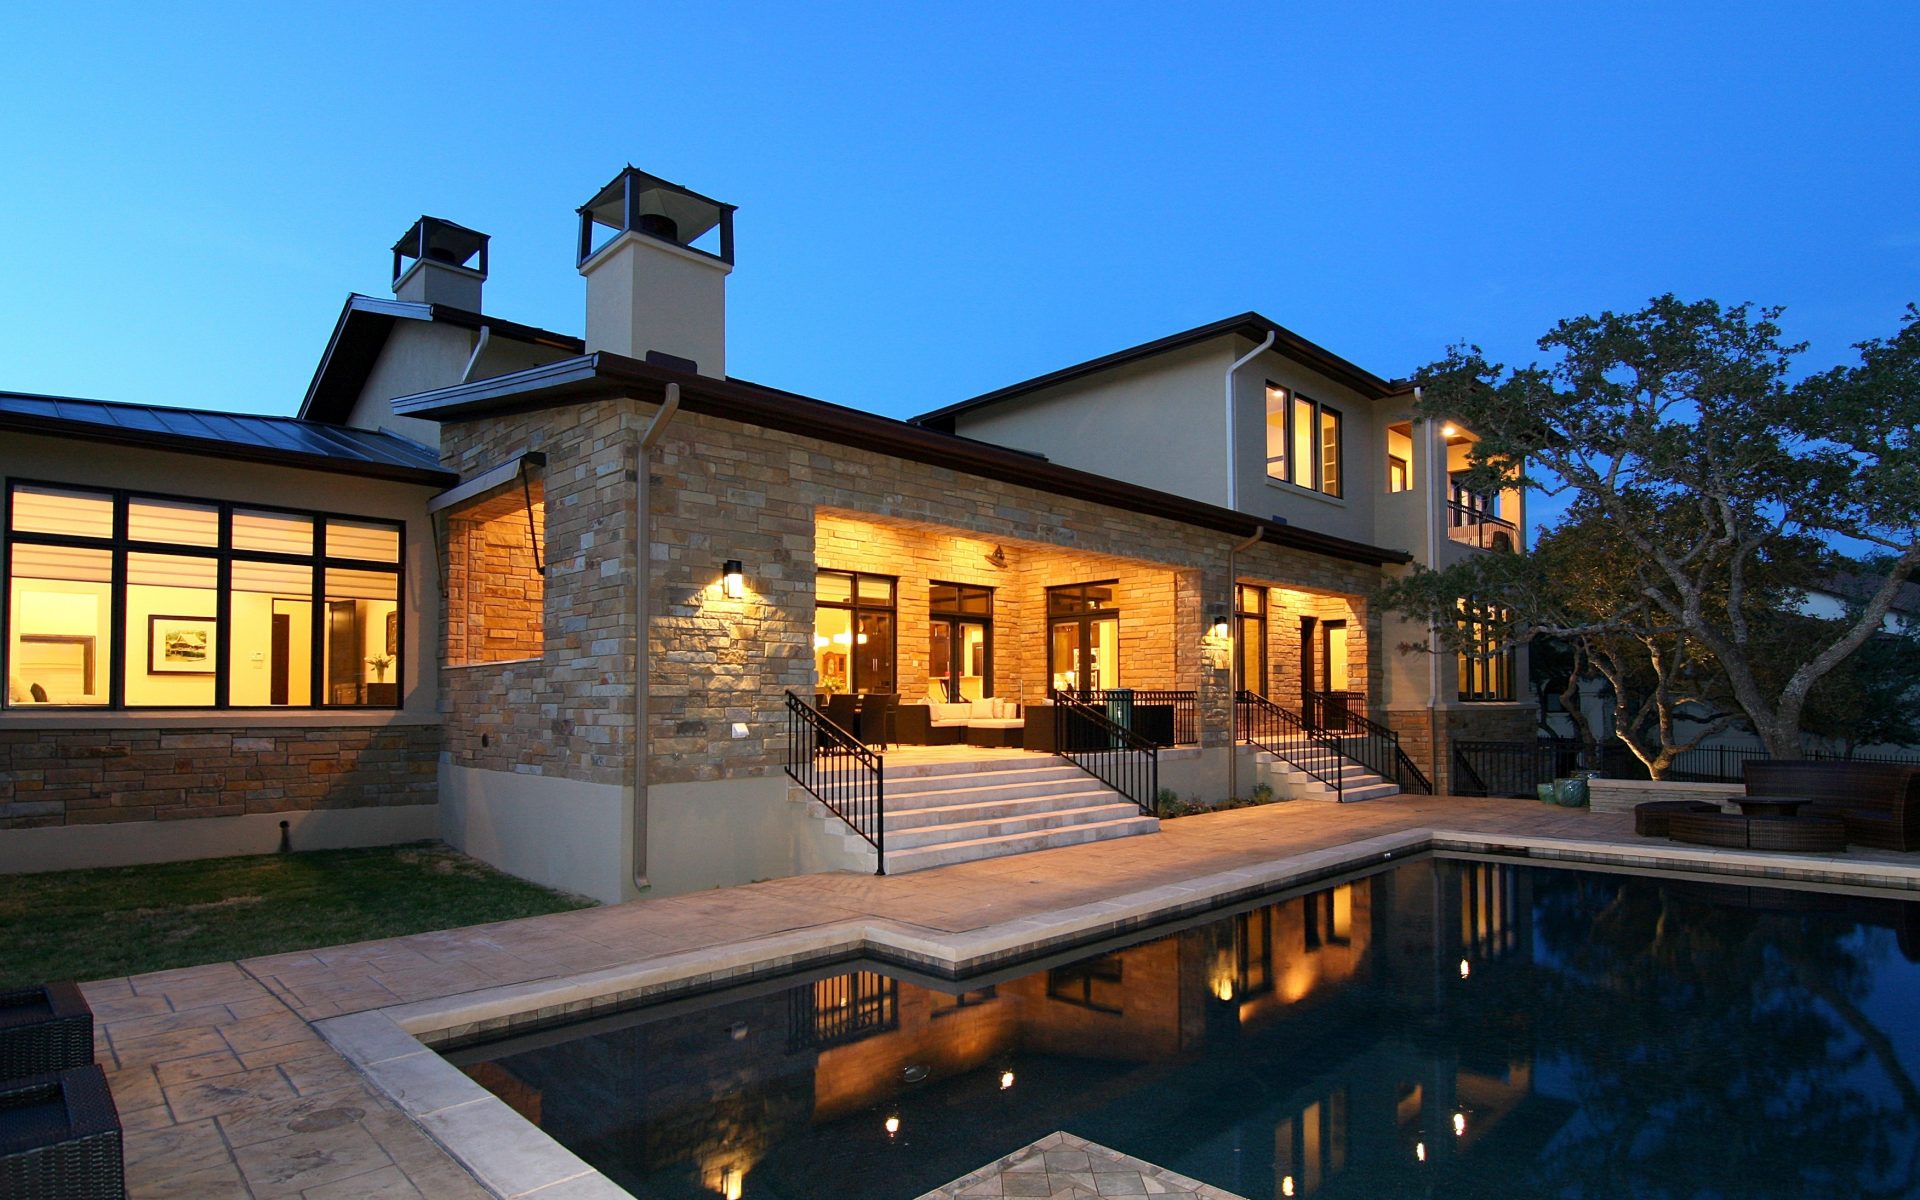 Luxury Home at Night - Download hd wallpapers